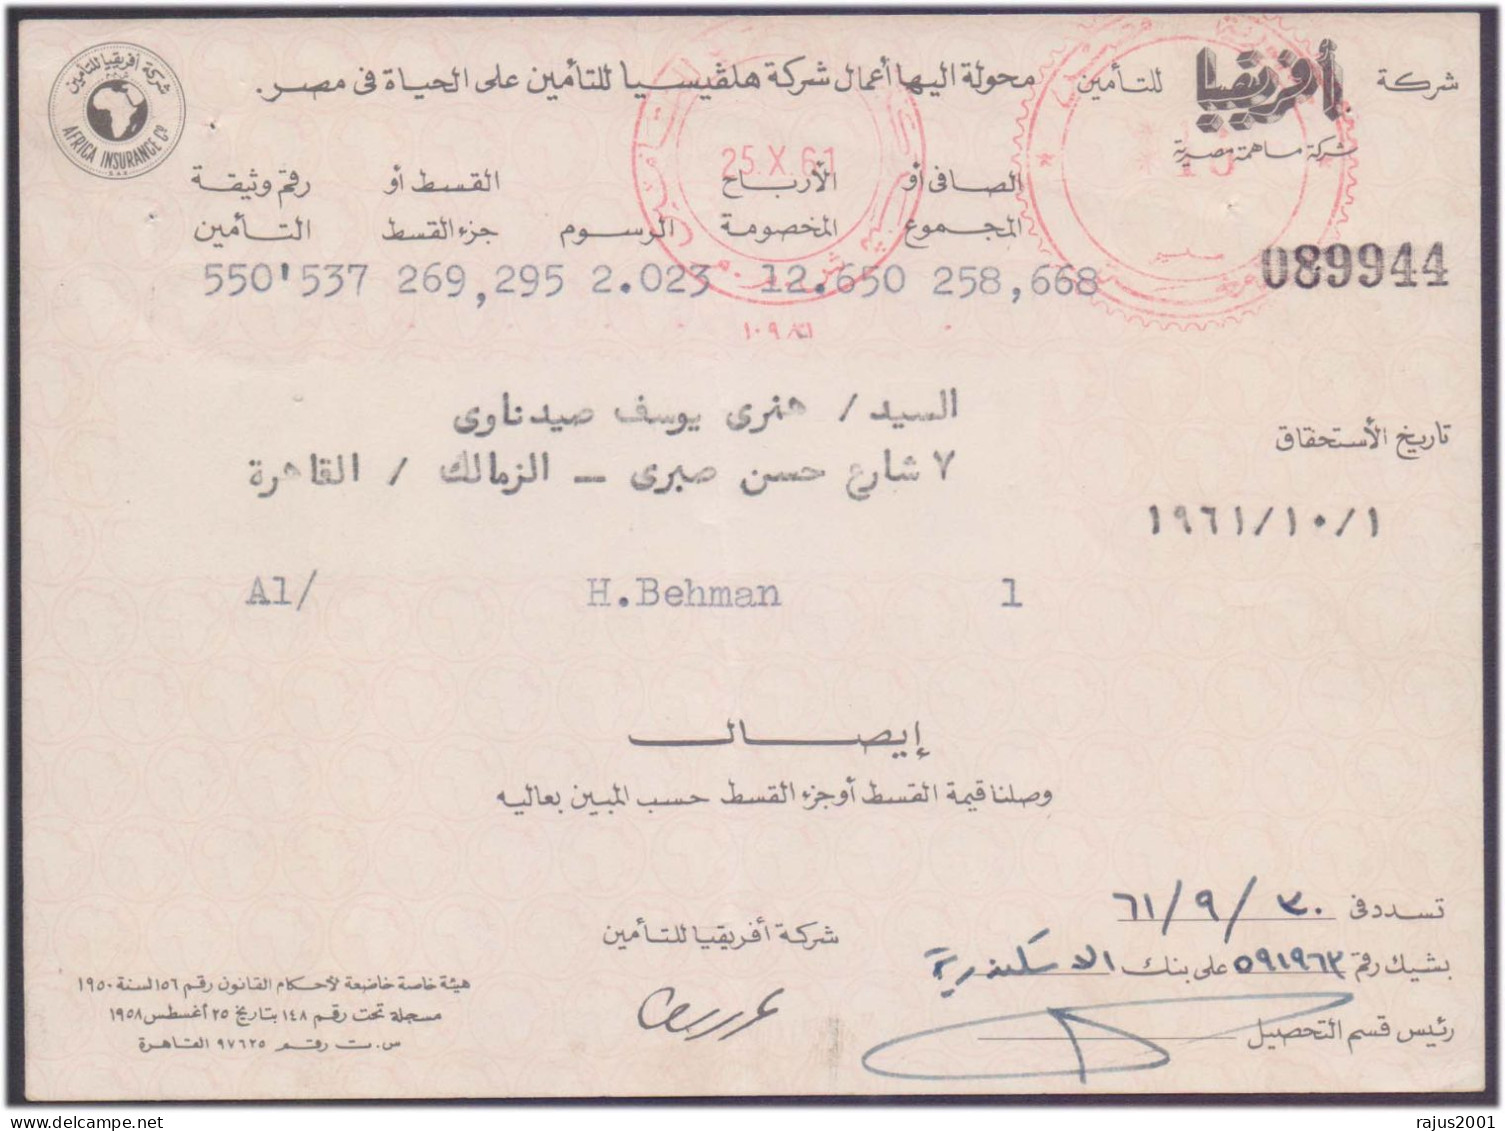 Business Of Helqisia Life Insurance Company In Egypt, RED METER FRANK, EMA, Receipt Old Document Egypt 1960 - Lettres & Documents